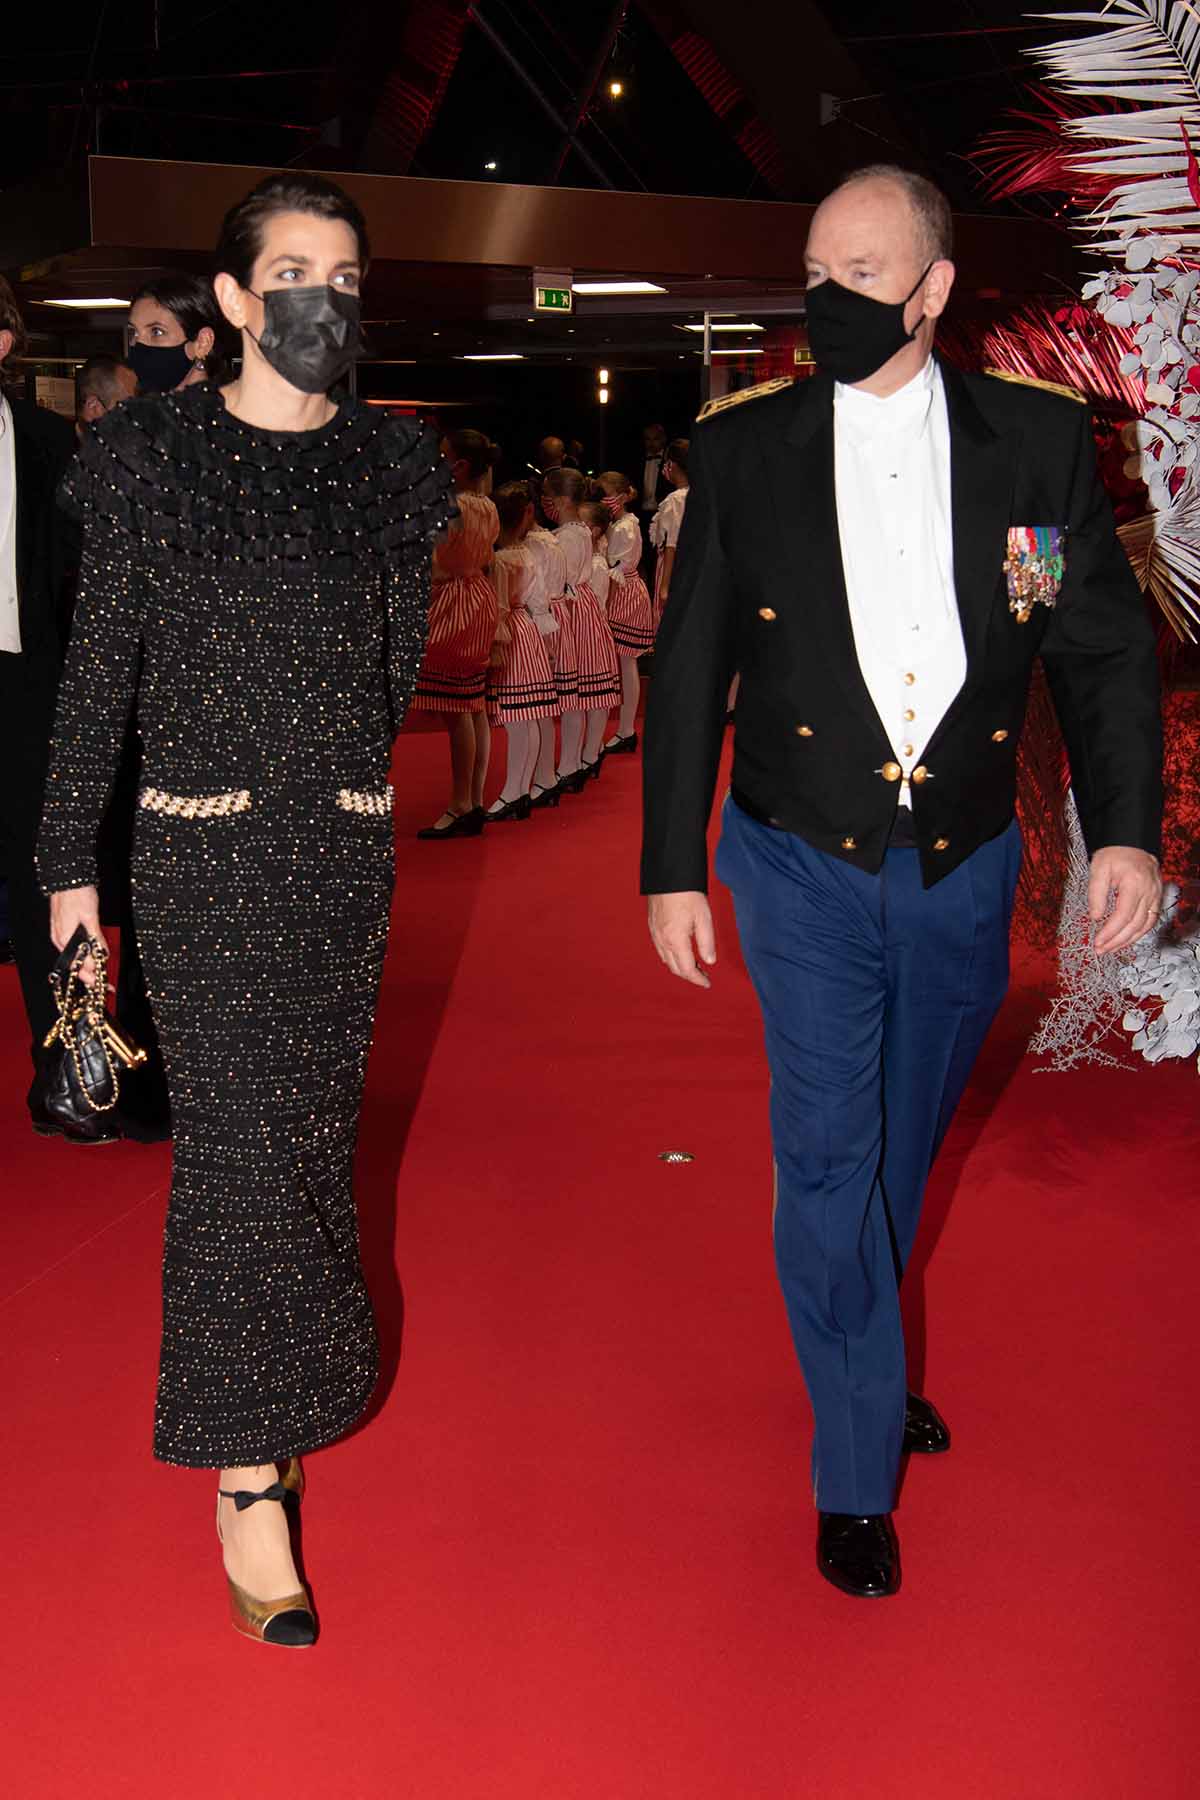 Prince Albert II of Monaco and Charlotte Casiraghi attend the gala at the Forum Grimaldi during the Monaco National Day Celebrations in Monaco, on November 19, 2021 in Monaco, France.